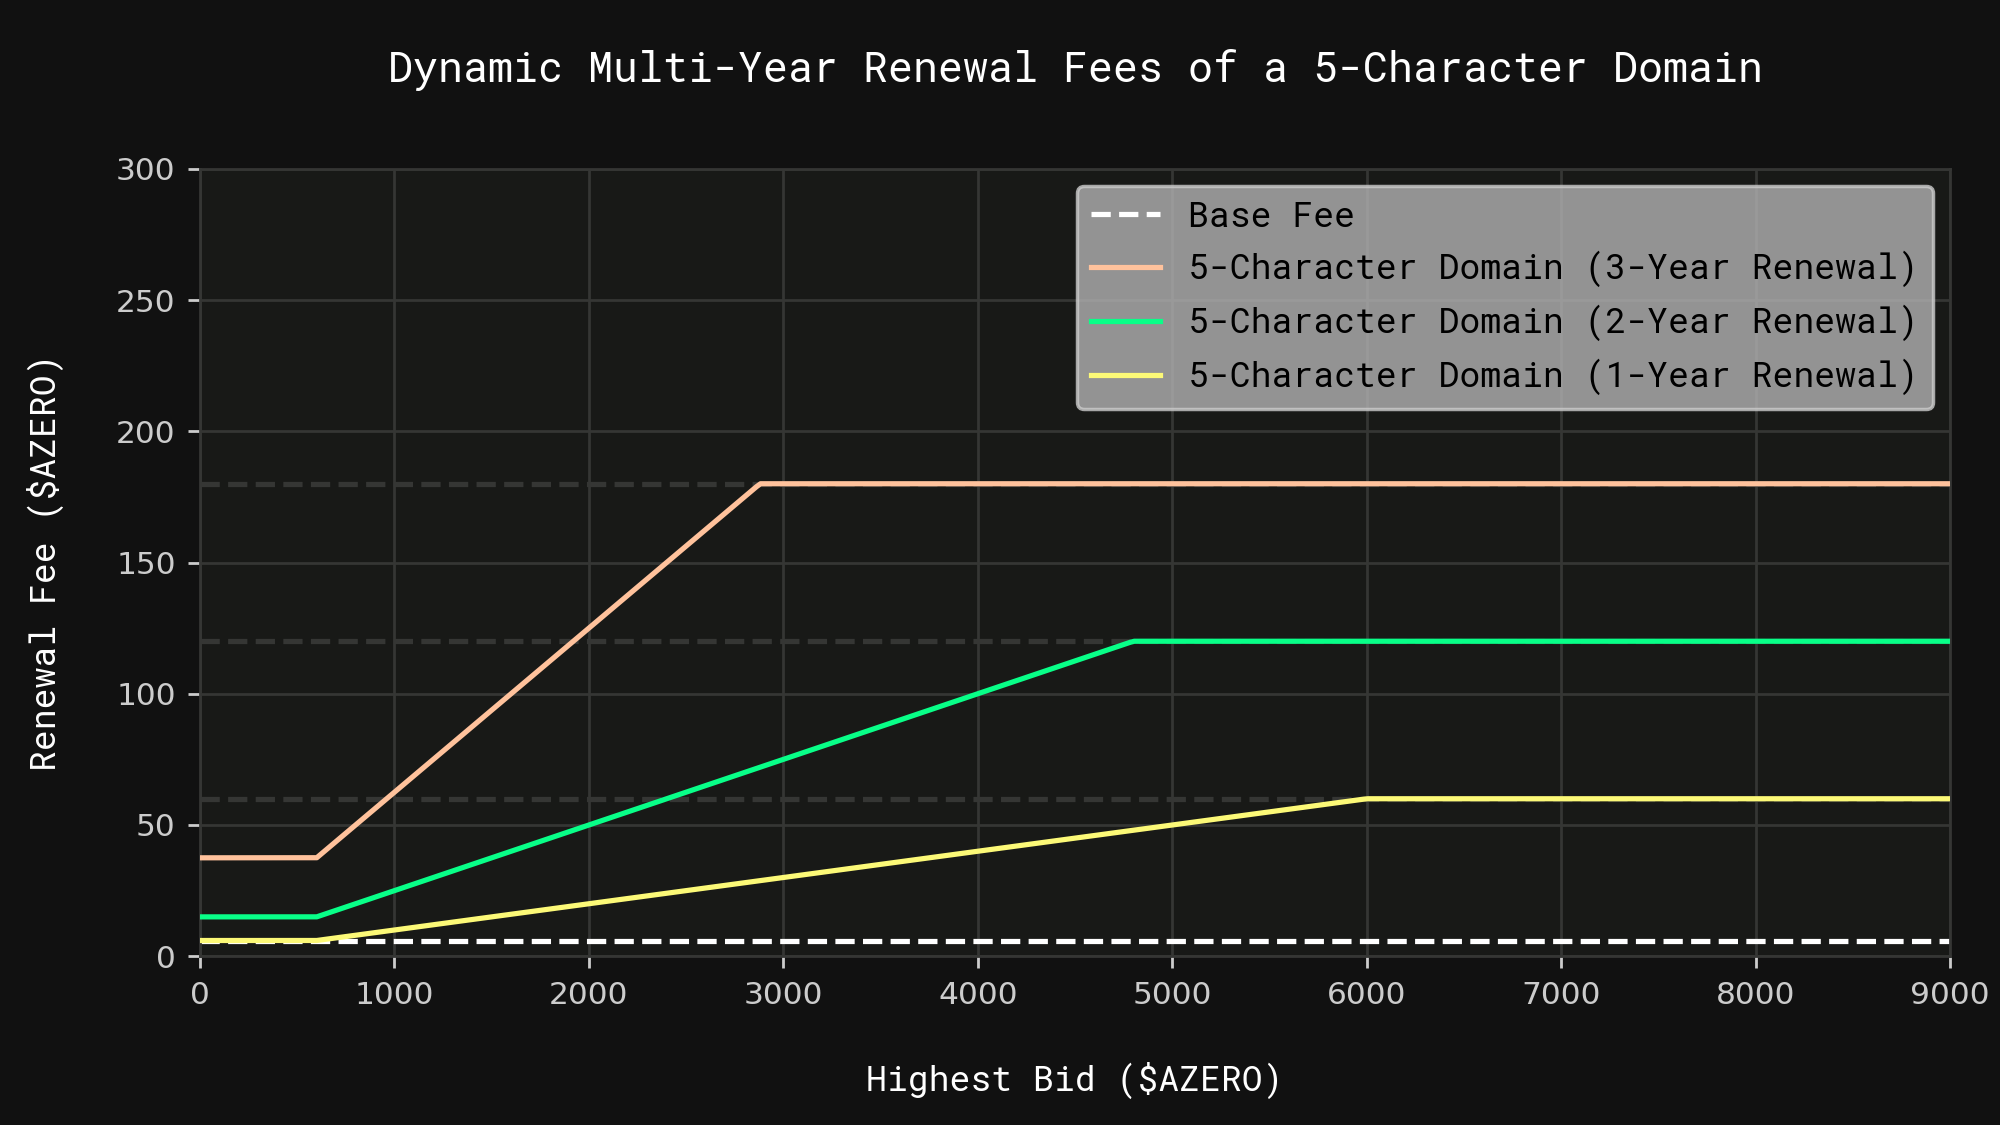 Example graph of the demand-based multi-year renewal fees for a 5-character domain